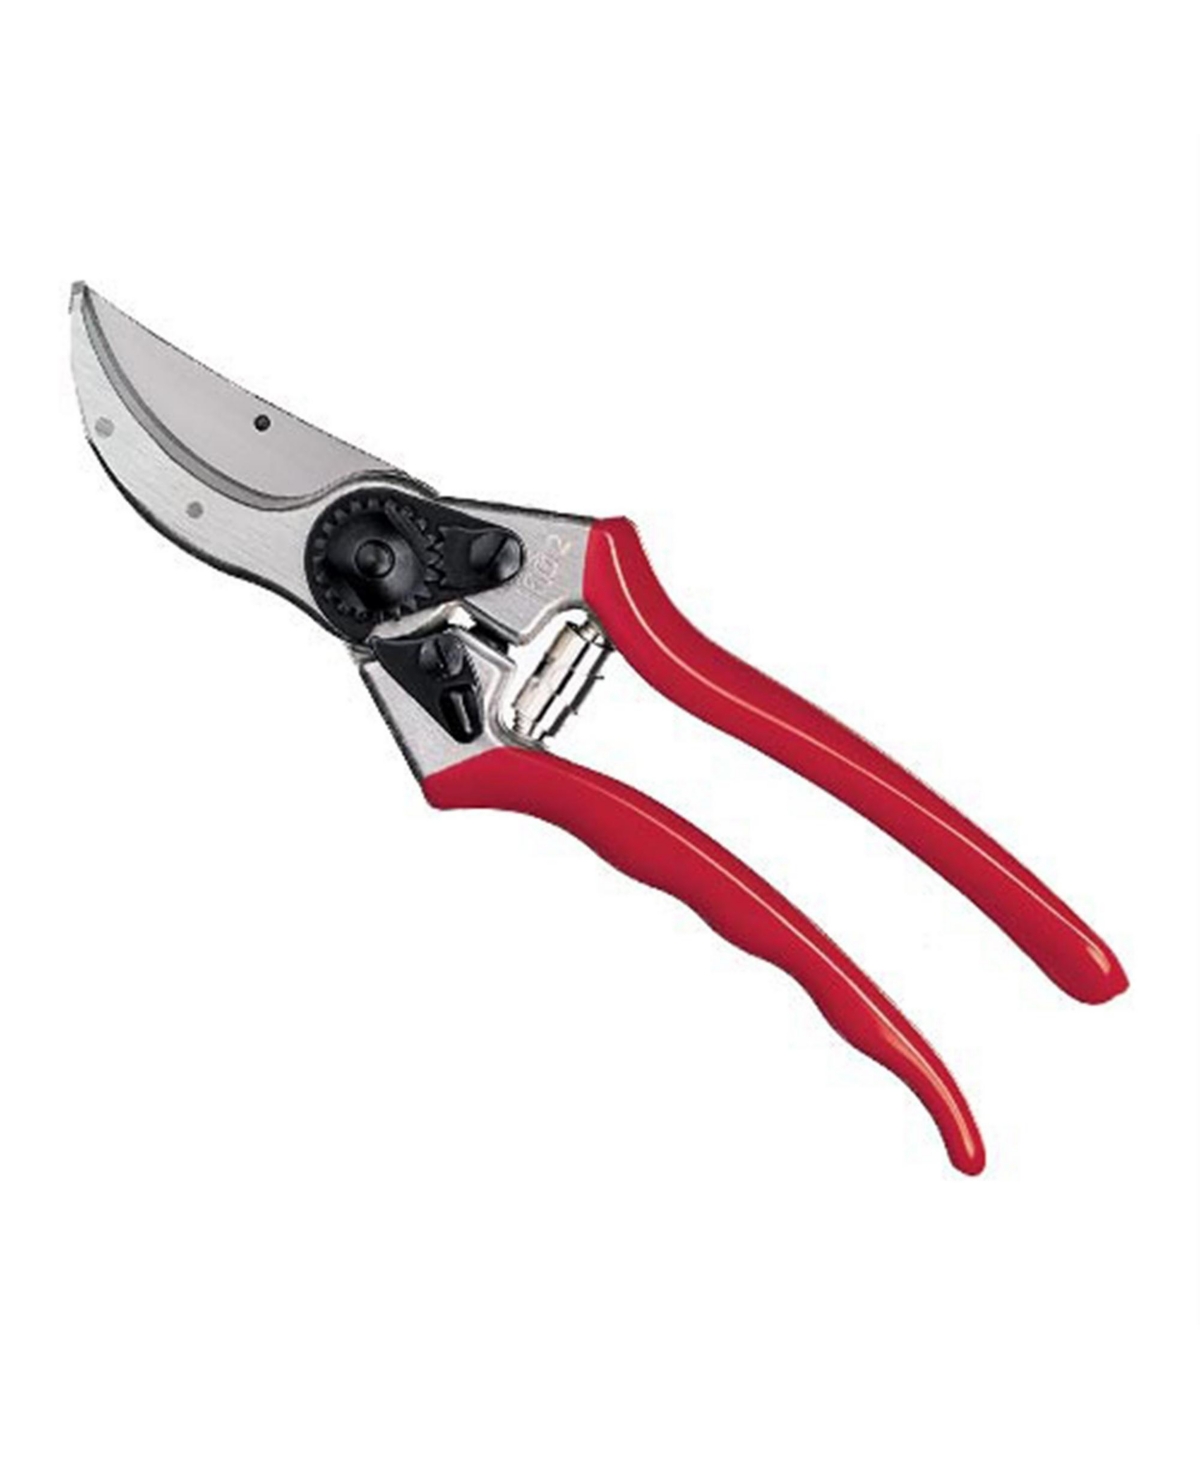 F2 Standard Right Handed Pruning Shears, 8.5 Inches - Multi